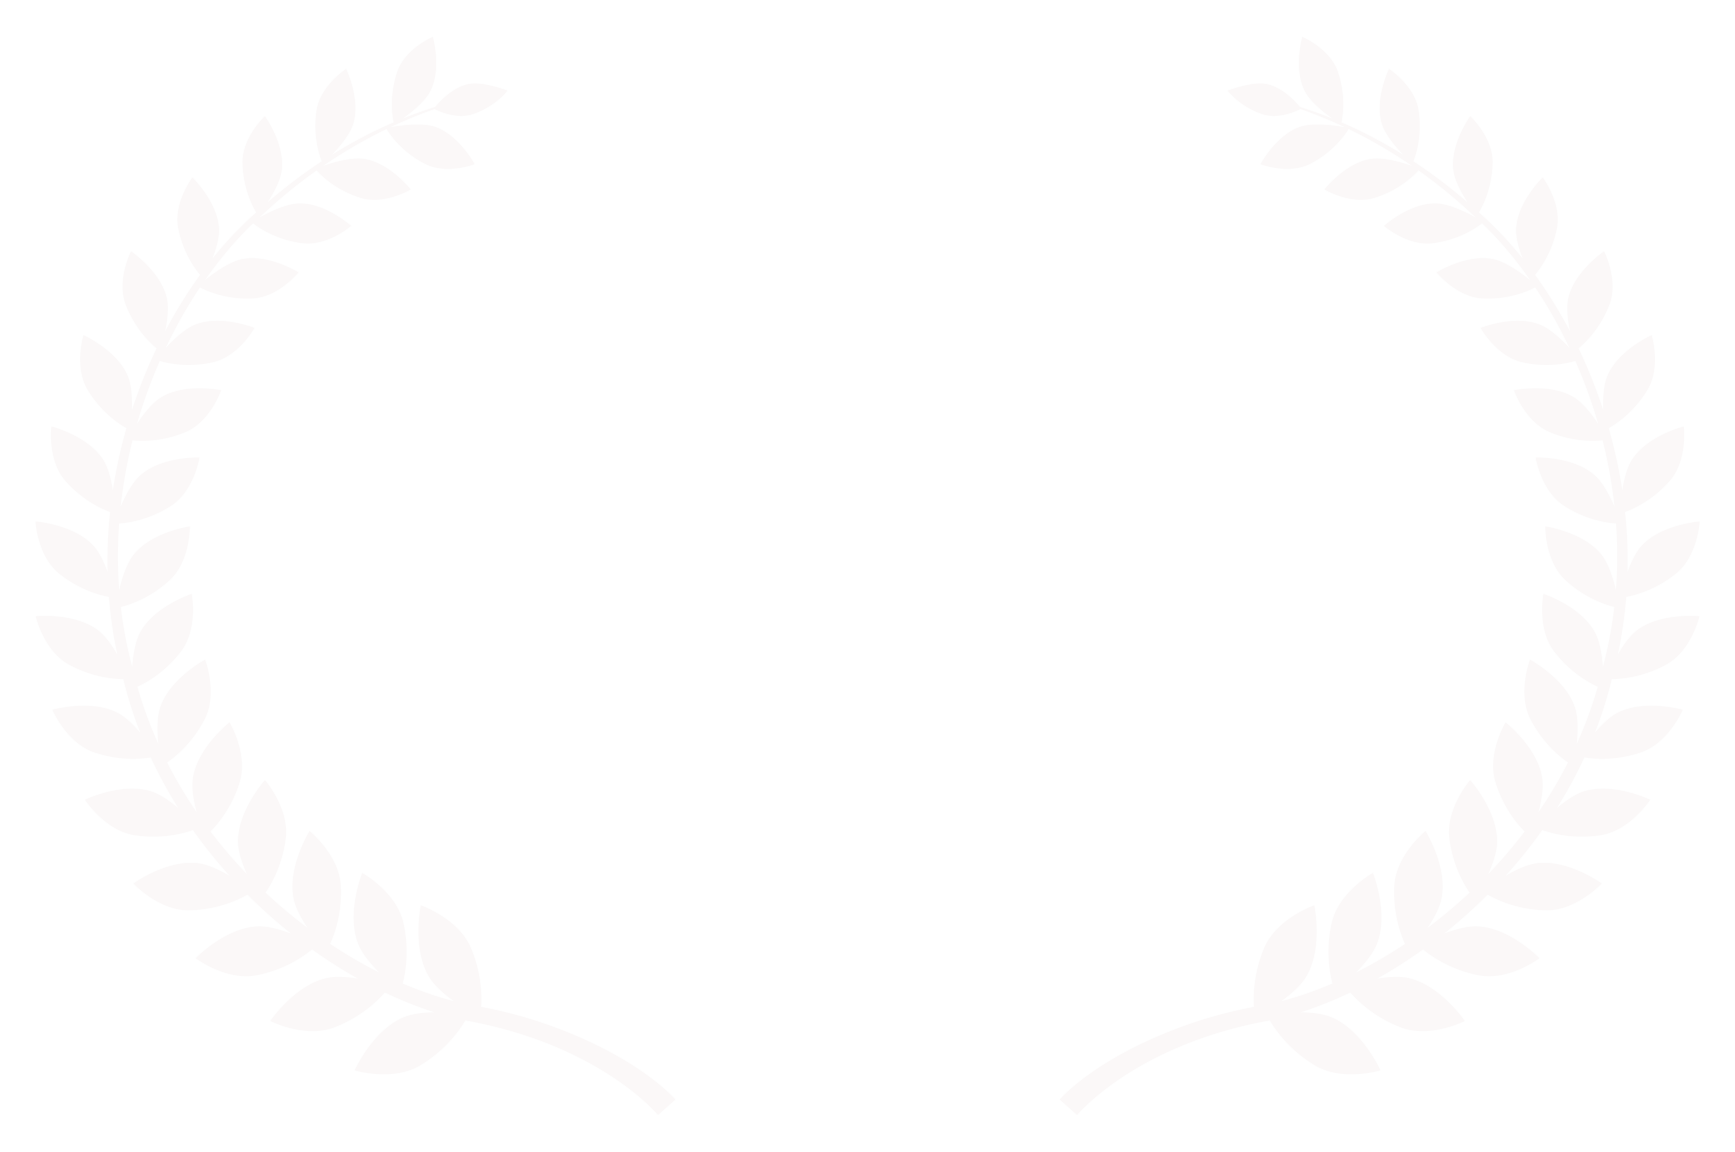 WOFFICIAL SELECTION - Maui Film Festival - 2020.png